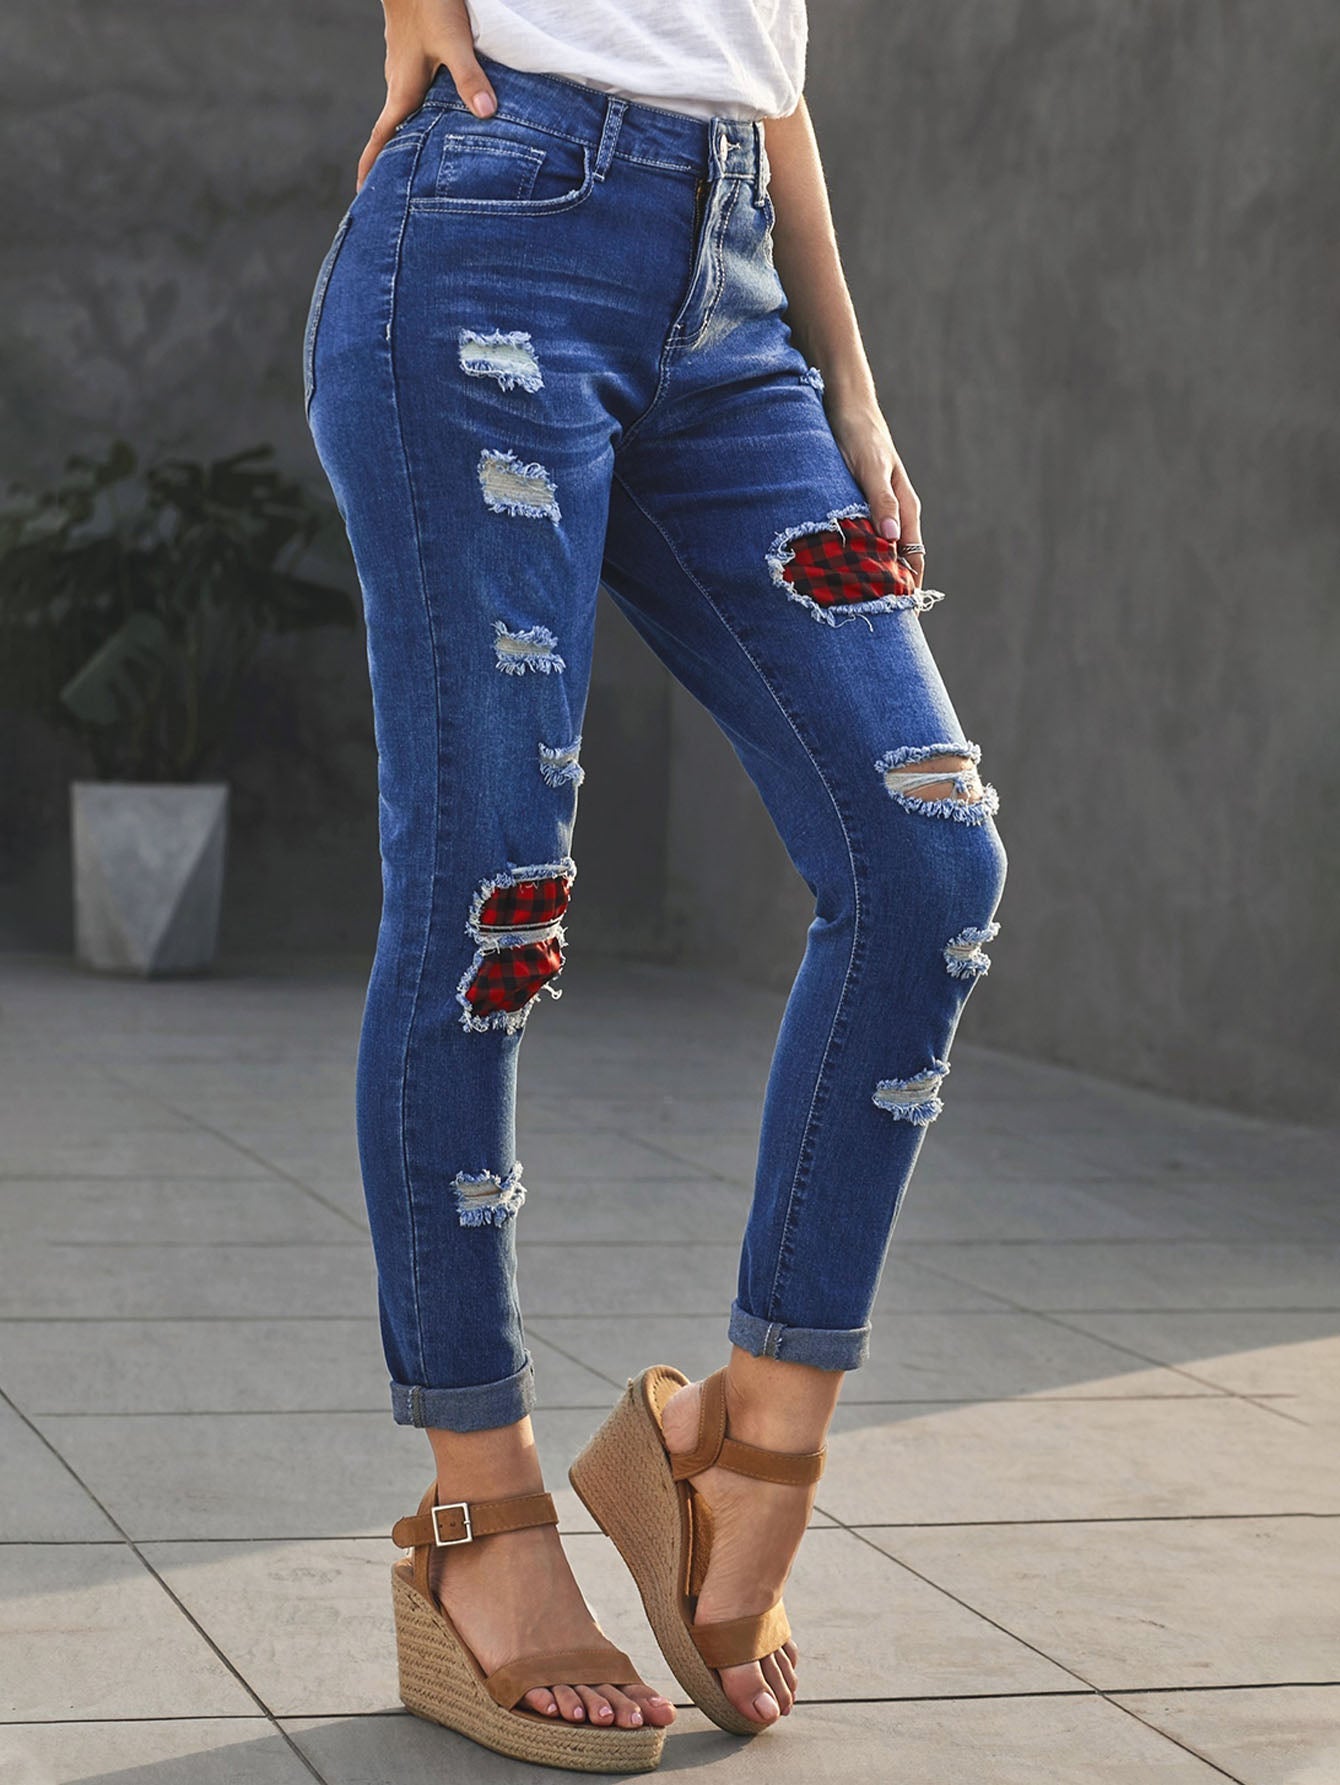 Patchwork Plaid Skinny Jeans Classic Ripped Straight Leg Hight Waisted Pants Sai Feel